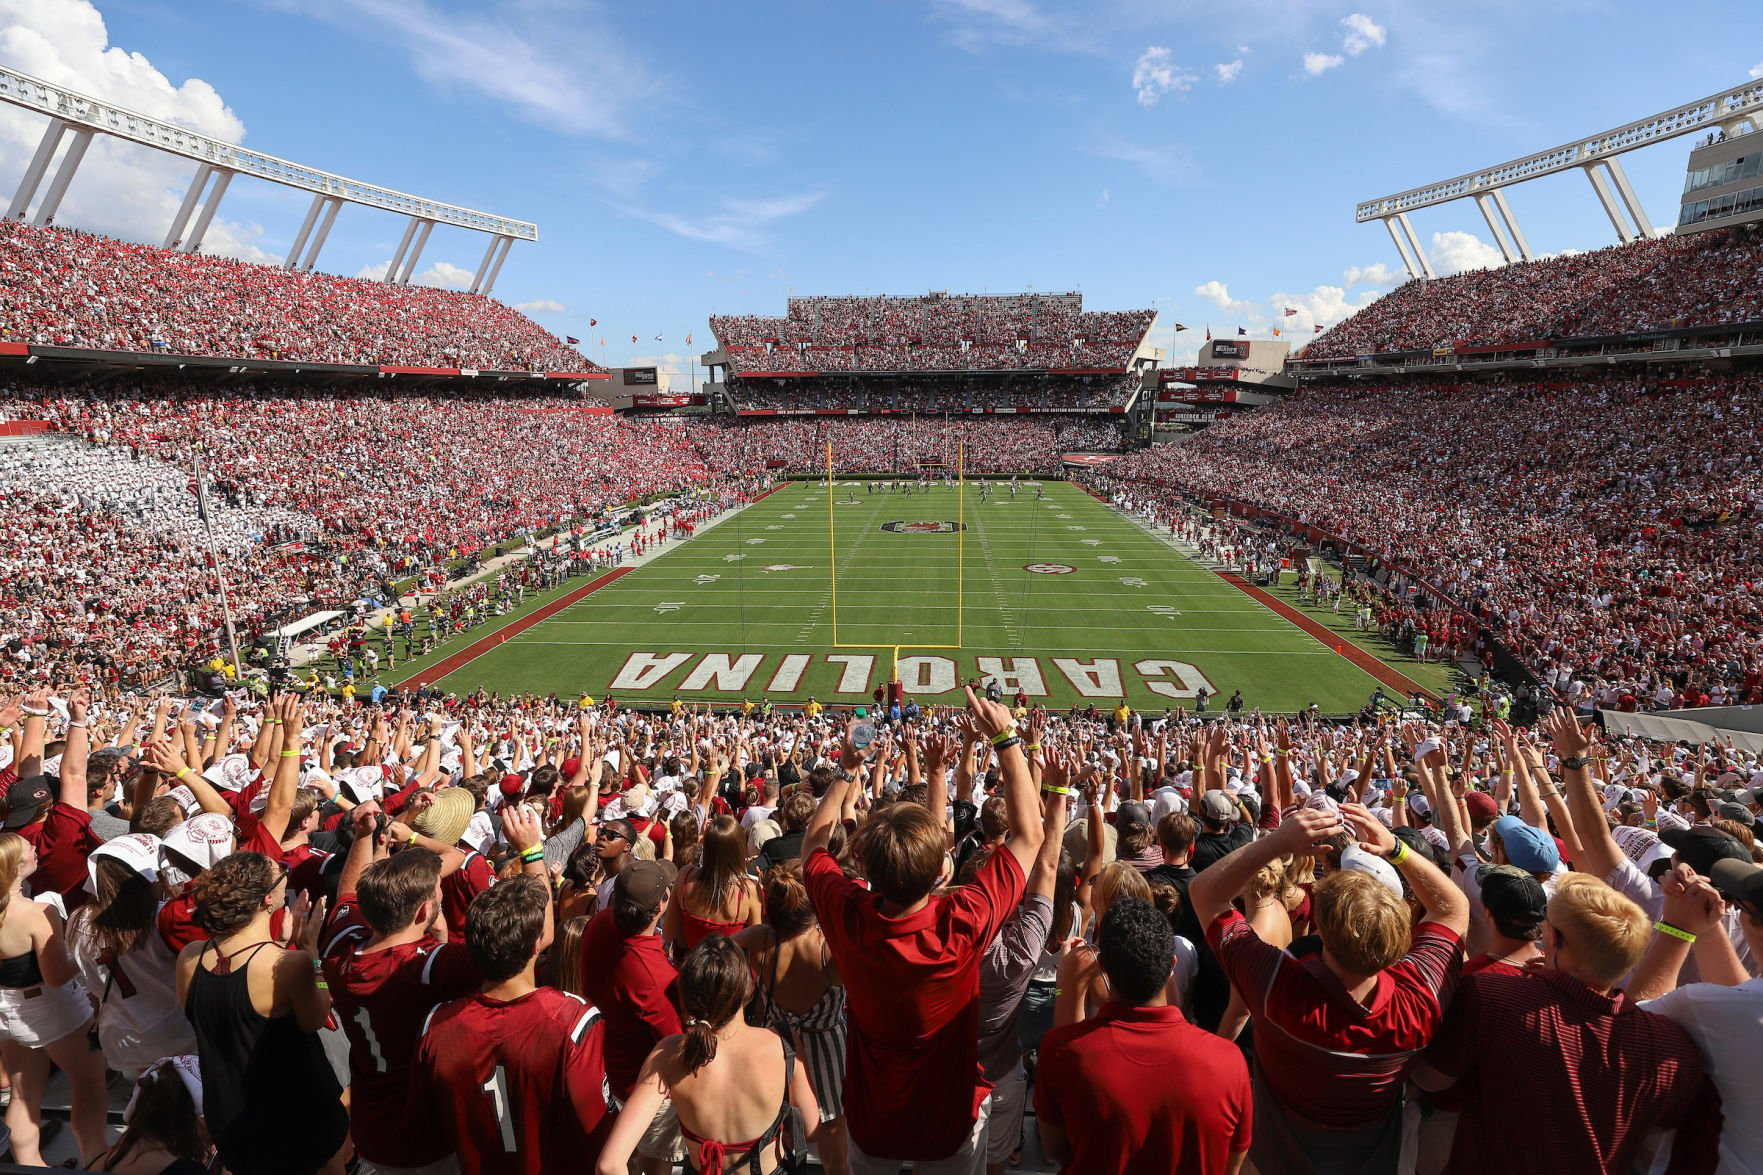 Williams Brice Stadium Seating Chart With Rows